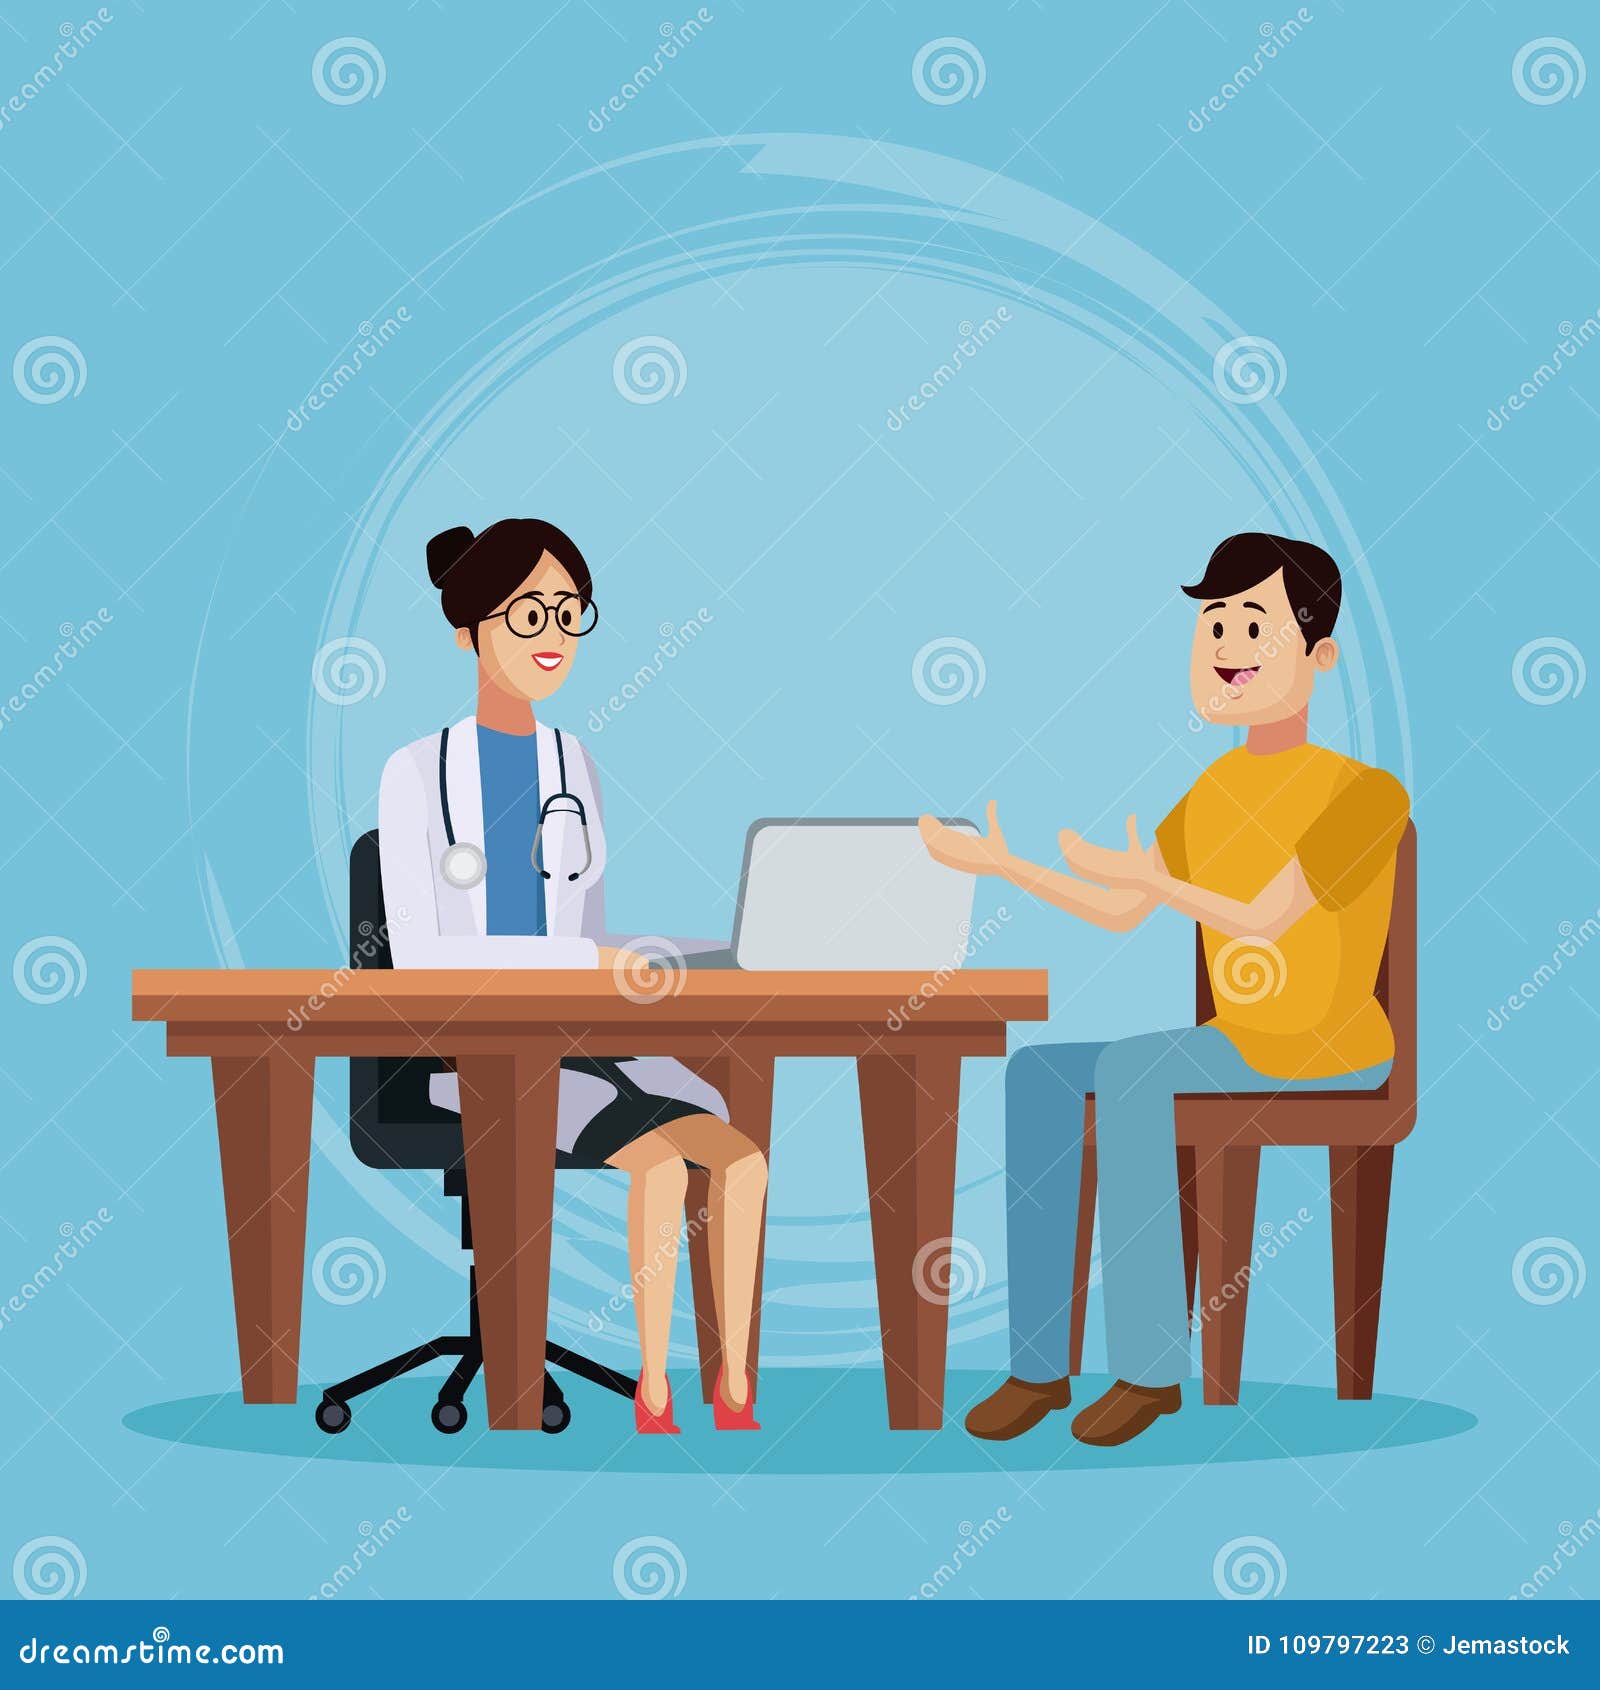 Doctor with Patient Cartoon Stock Vector - Illustration of exam,  examination: 109797223